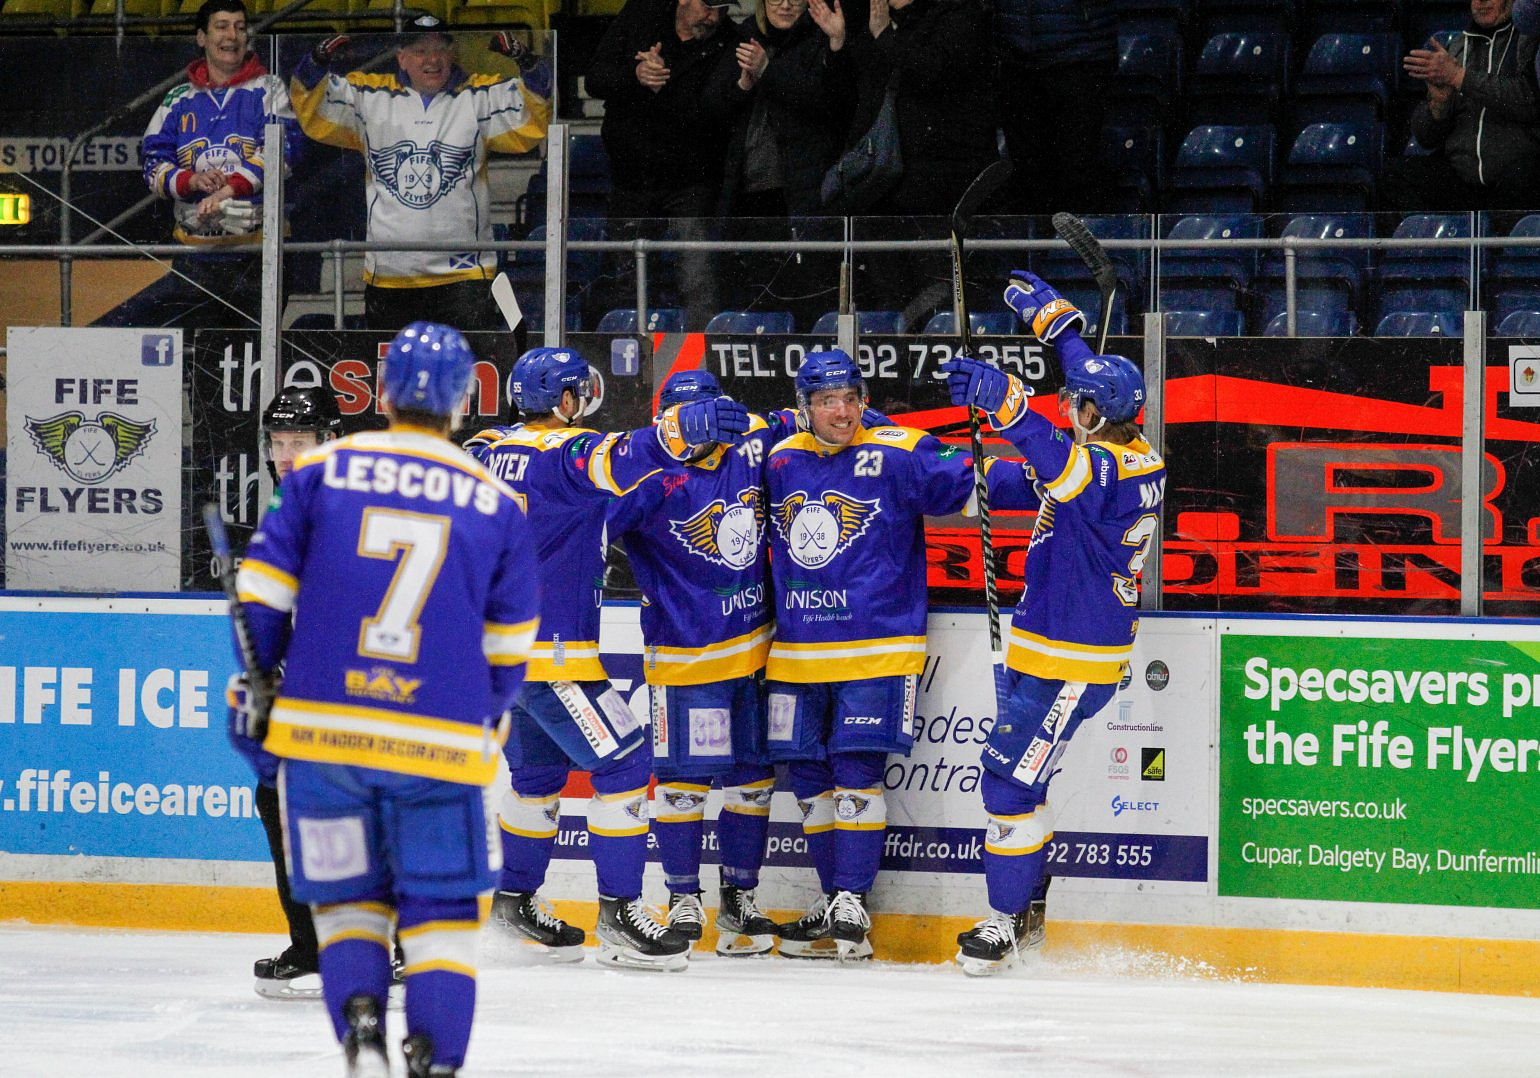 Fife Flyers - Len, who's been recording Flyers matches for